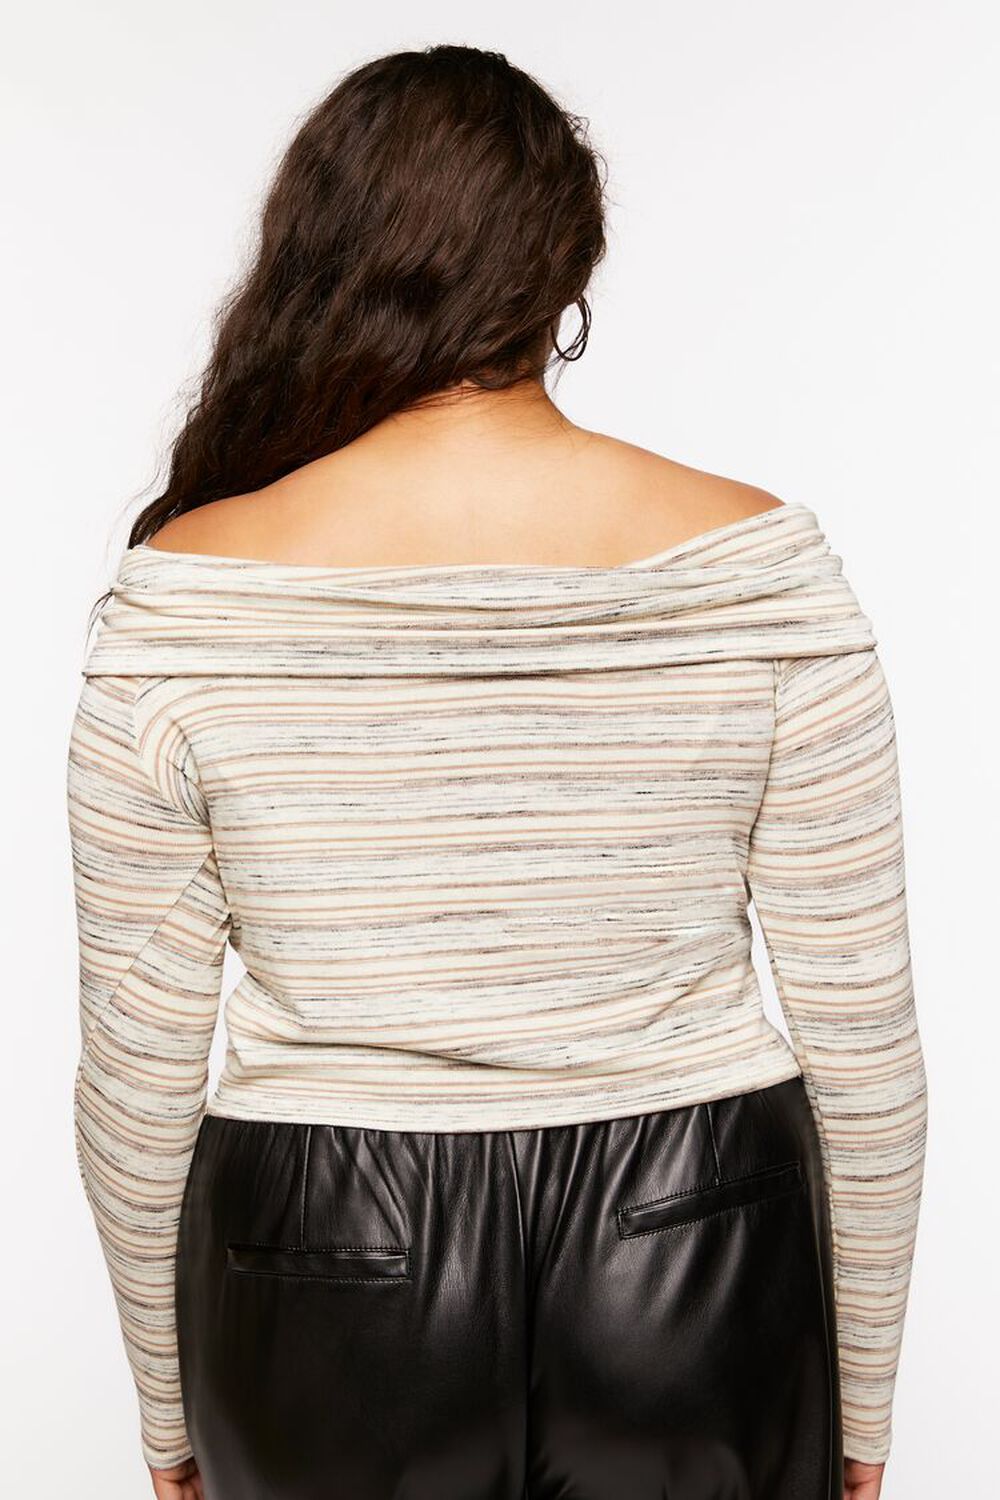 CREAM/MULTI Plus Size Twisted Off-the-Shoulder Striped Top, image 3